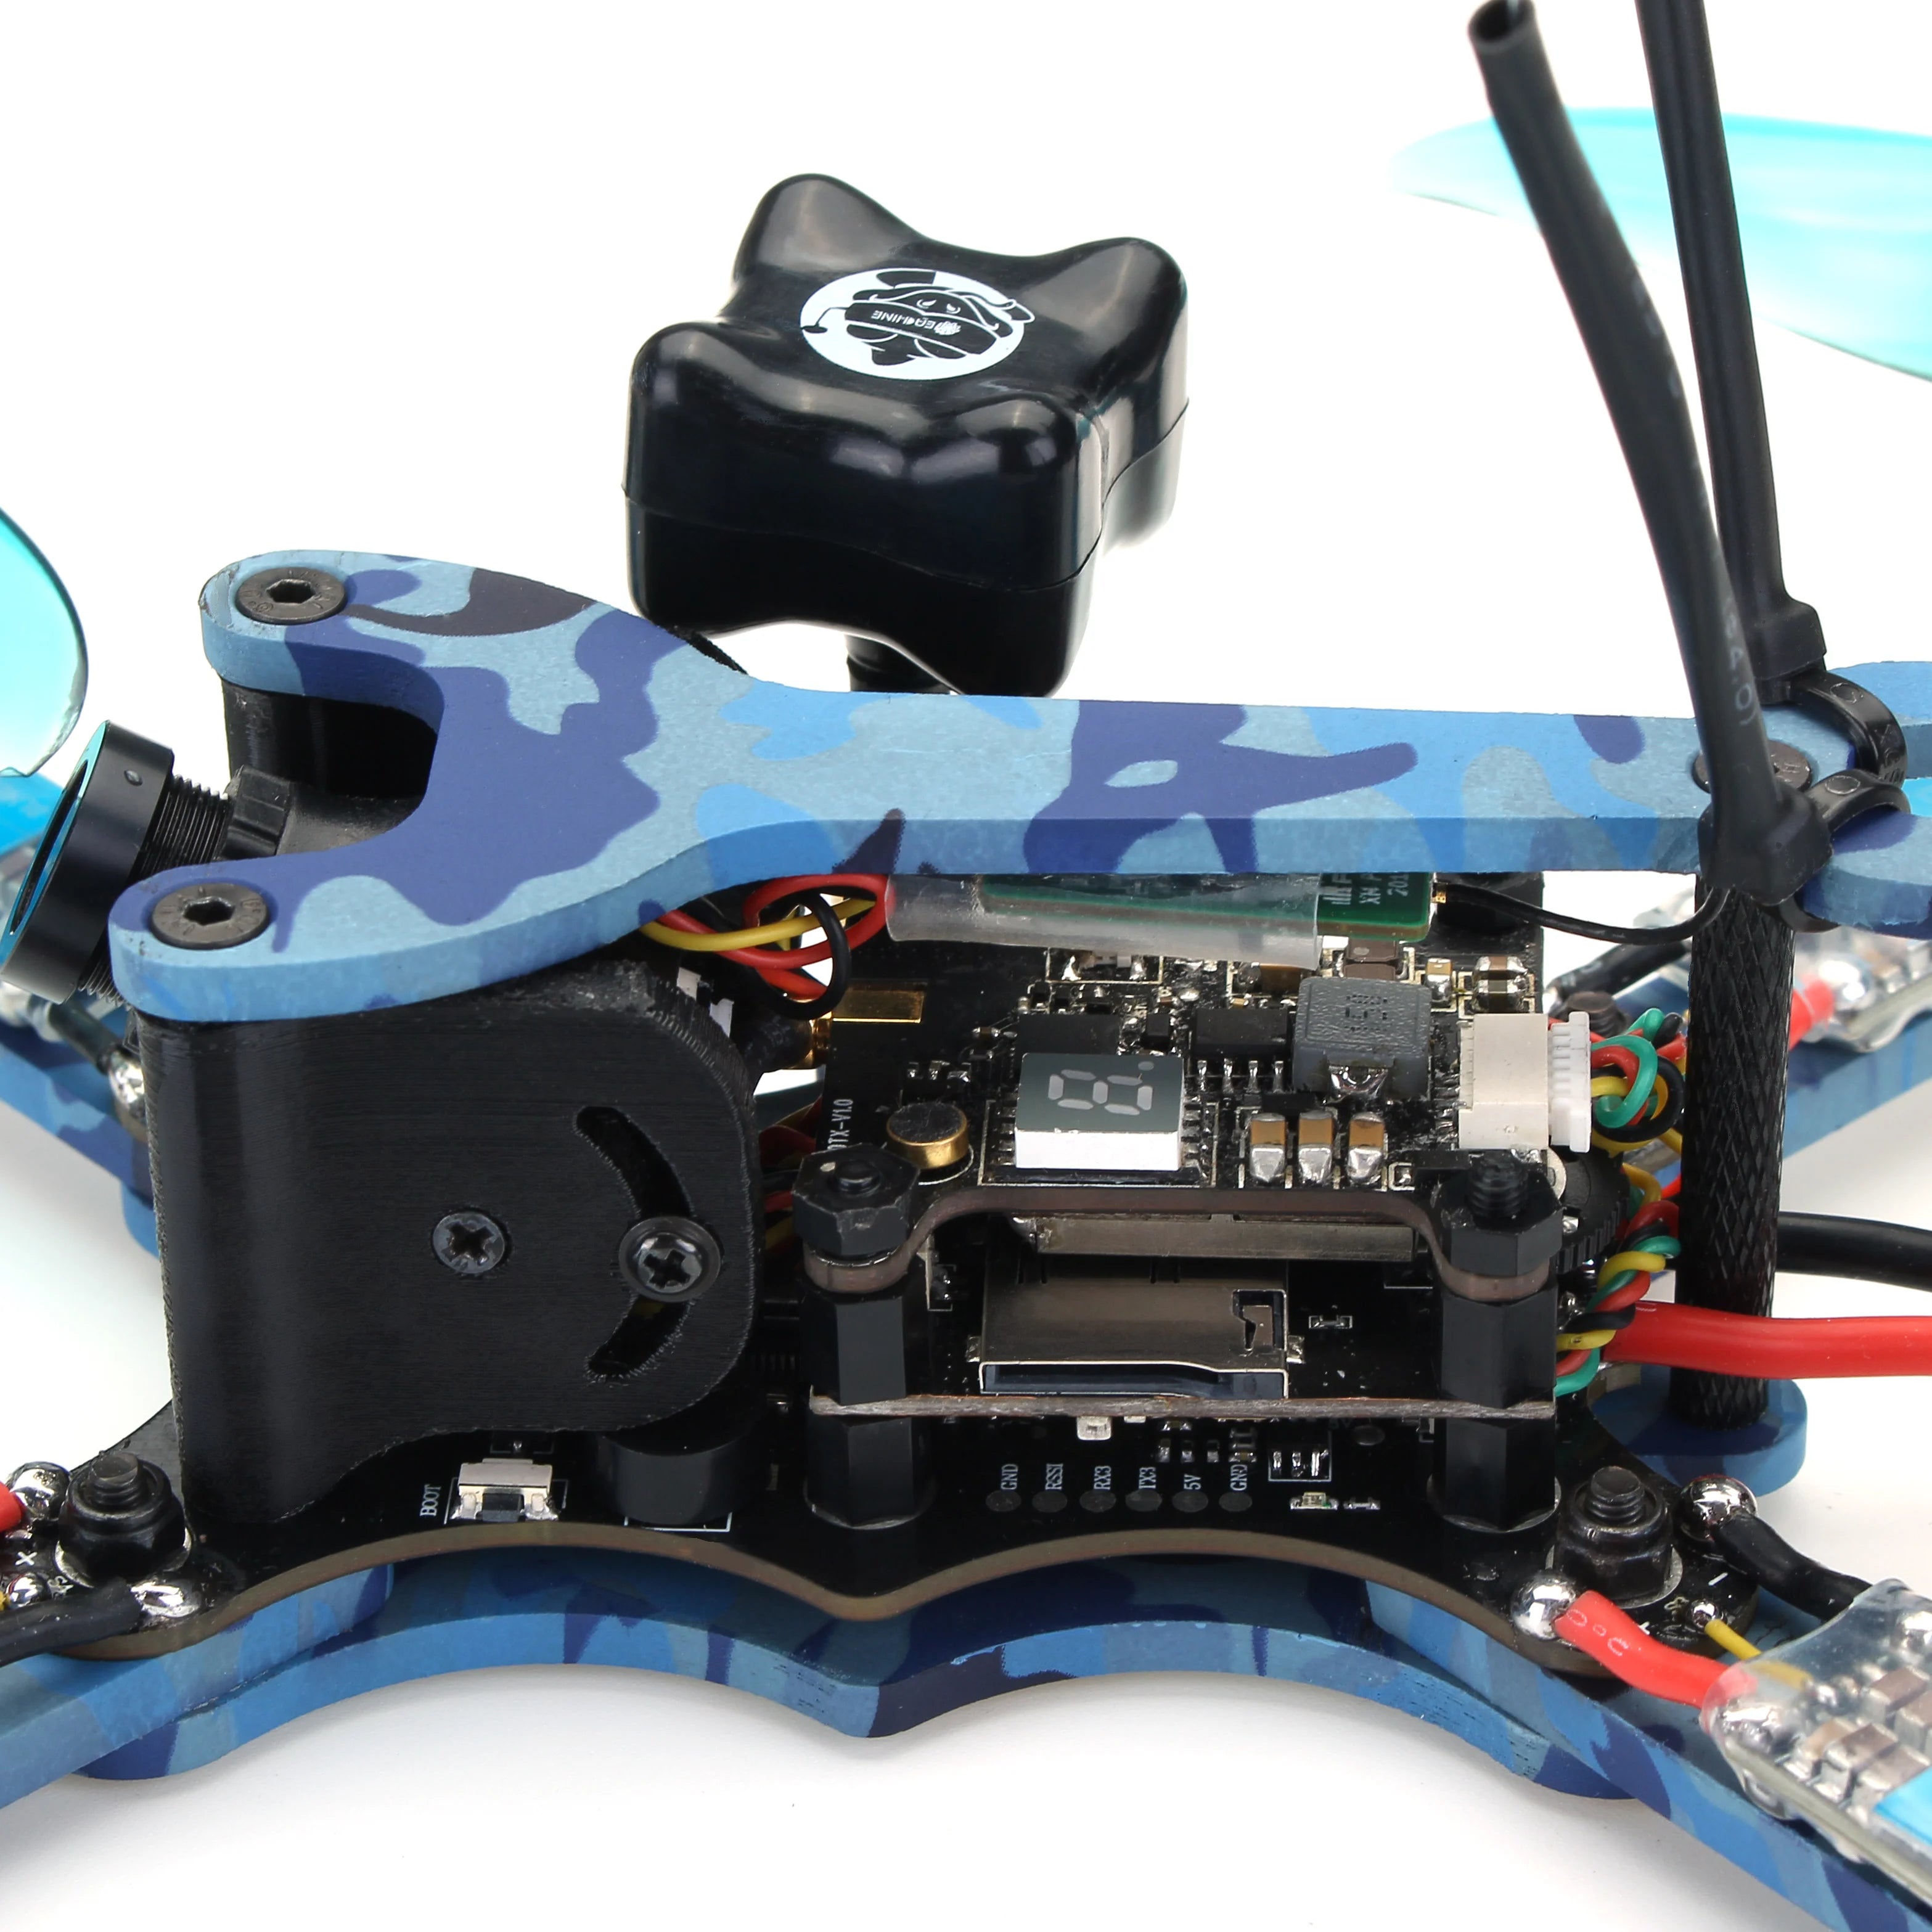 TCMMRC TS215 Rc Drone, storage board: Support 720p high definition recording Maximum support for 32g memory cards .